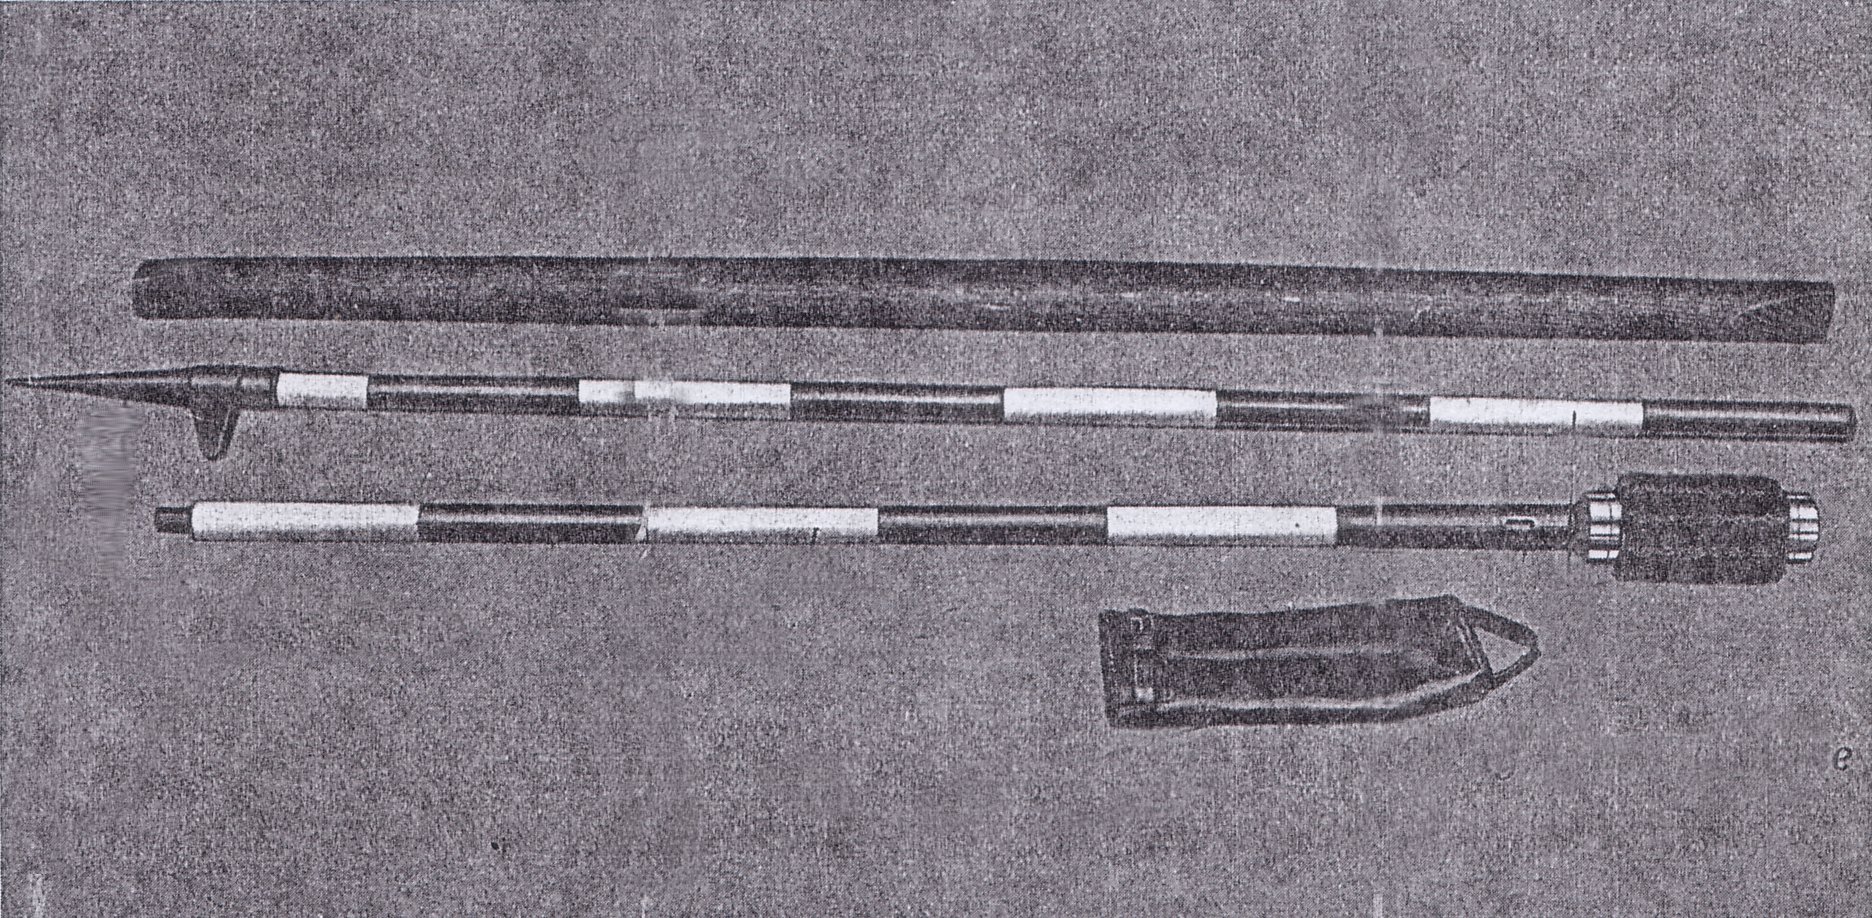 German 10,5cm Light Field Howitzer 1916 Bore Brush & Aiming Stakes